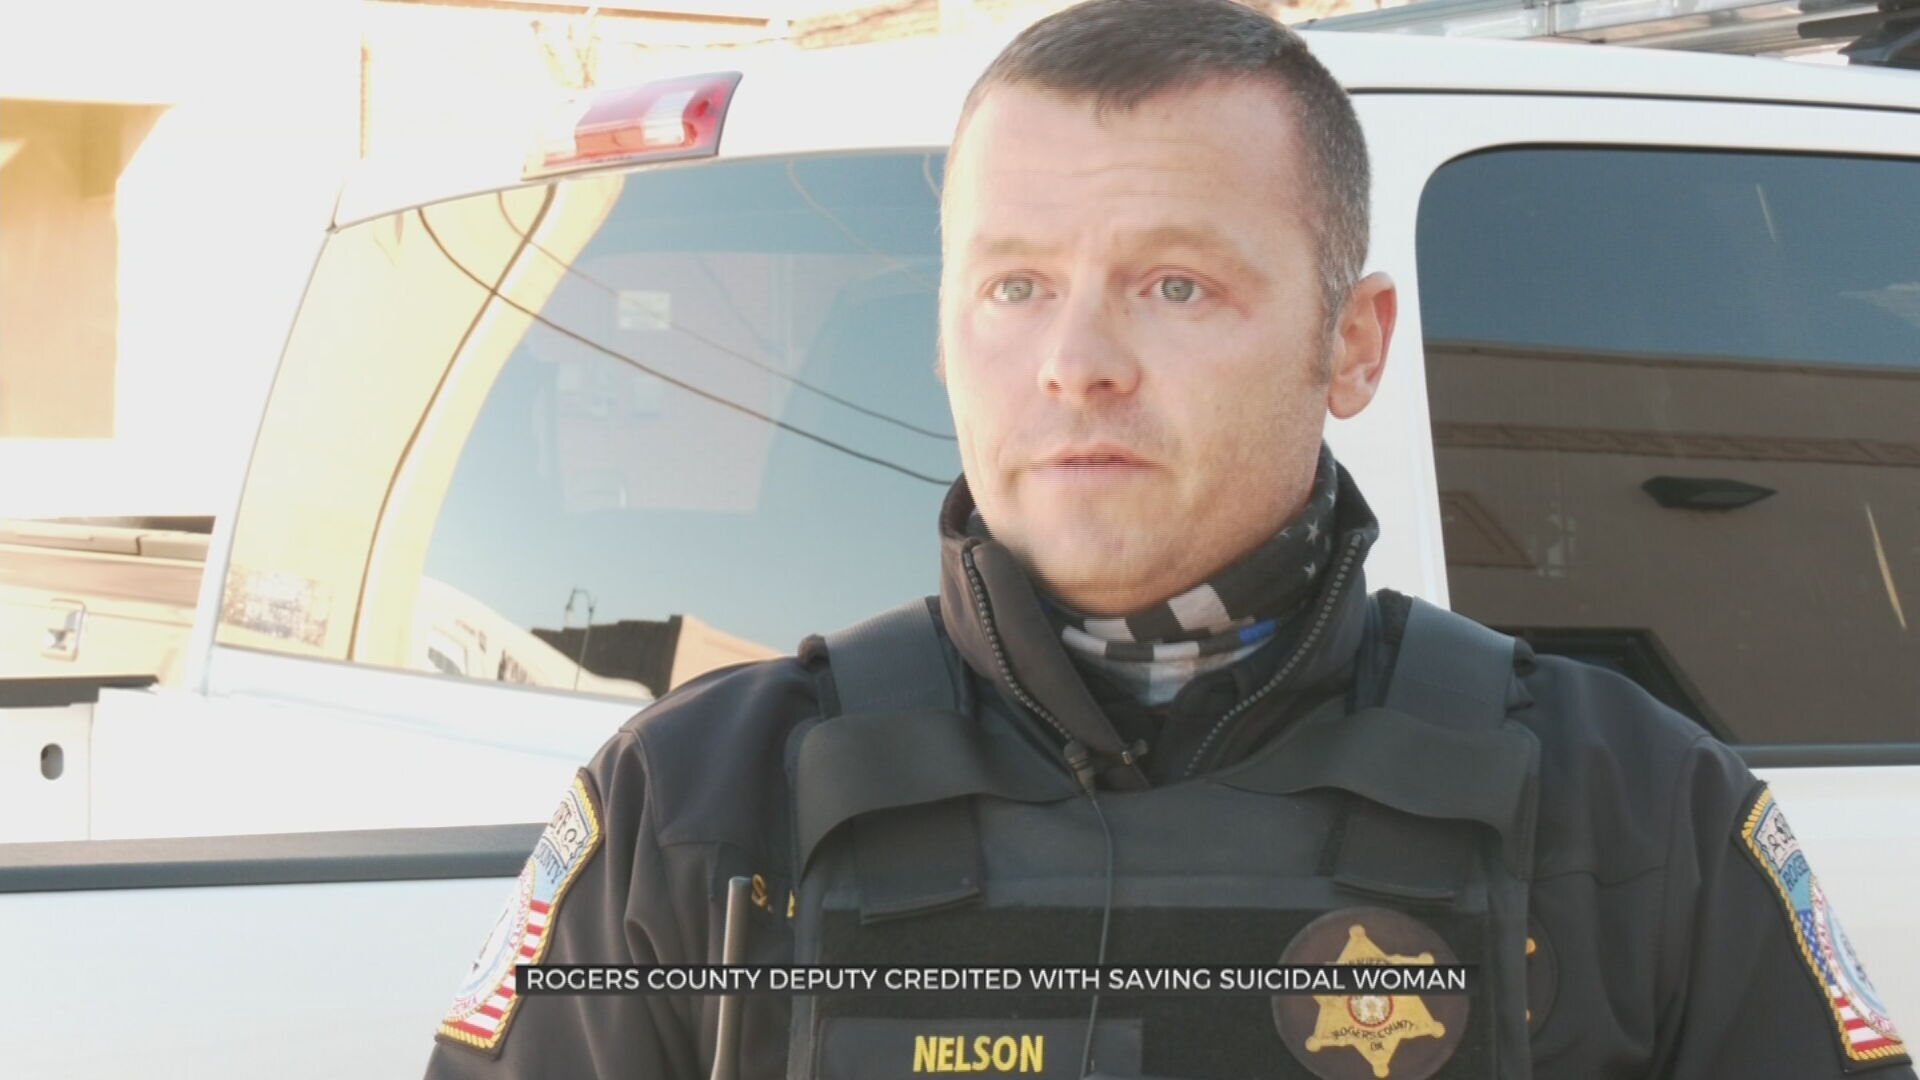 Rogers County Deputy Credited With Saving Suicidal Woman 